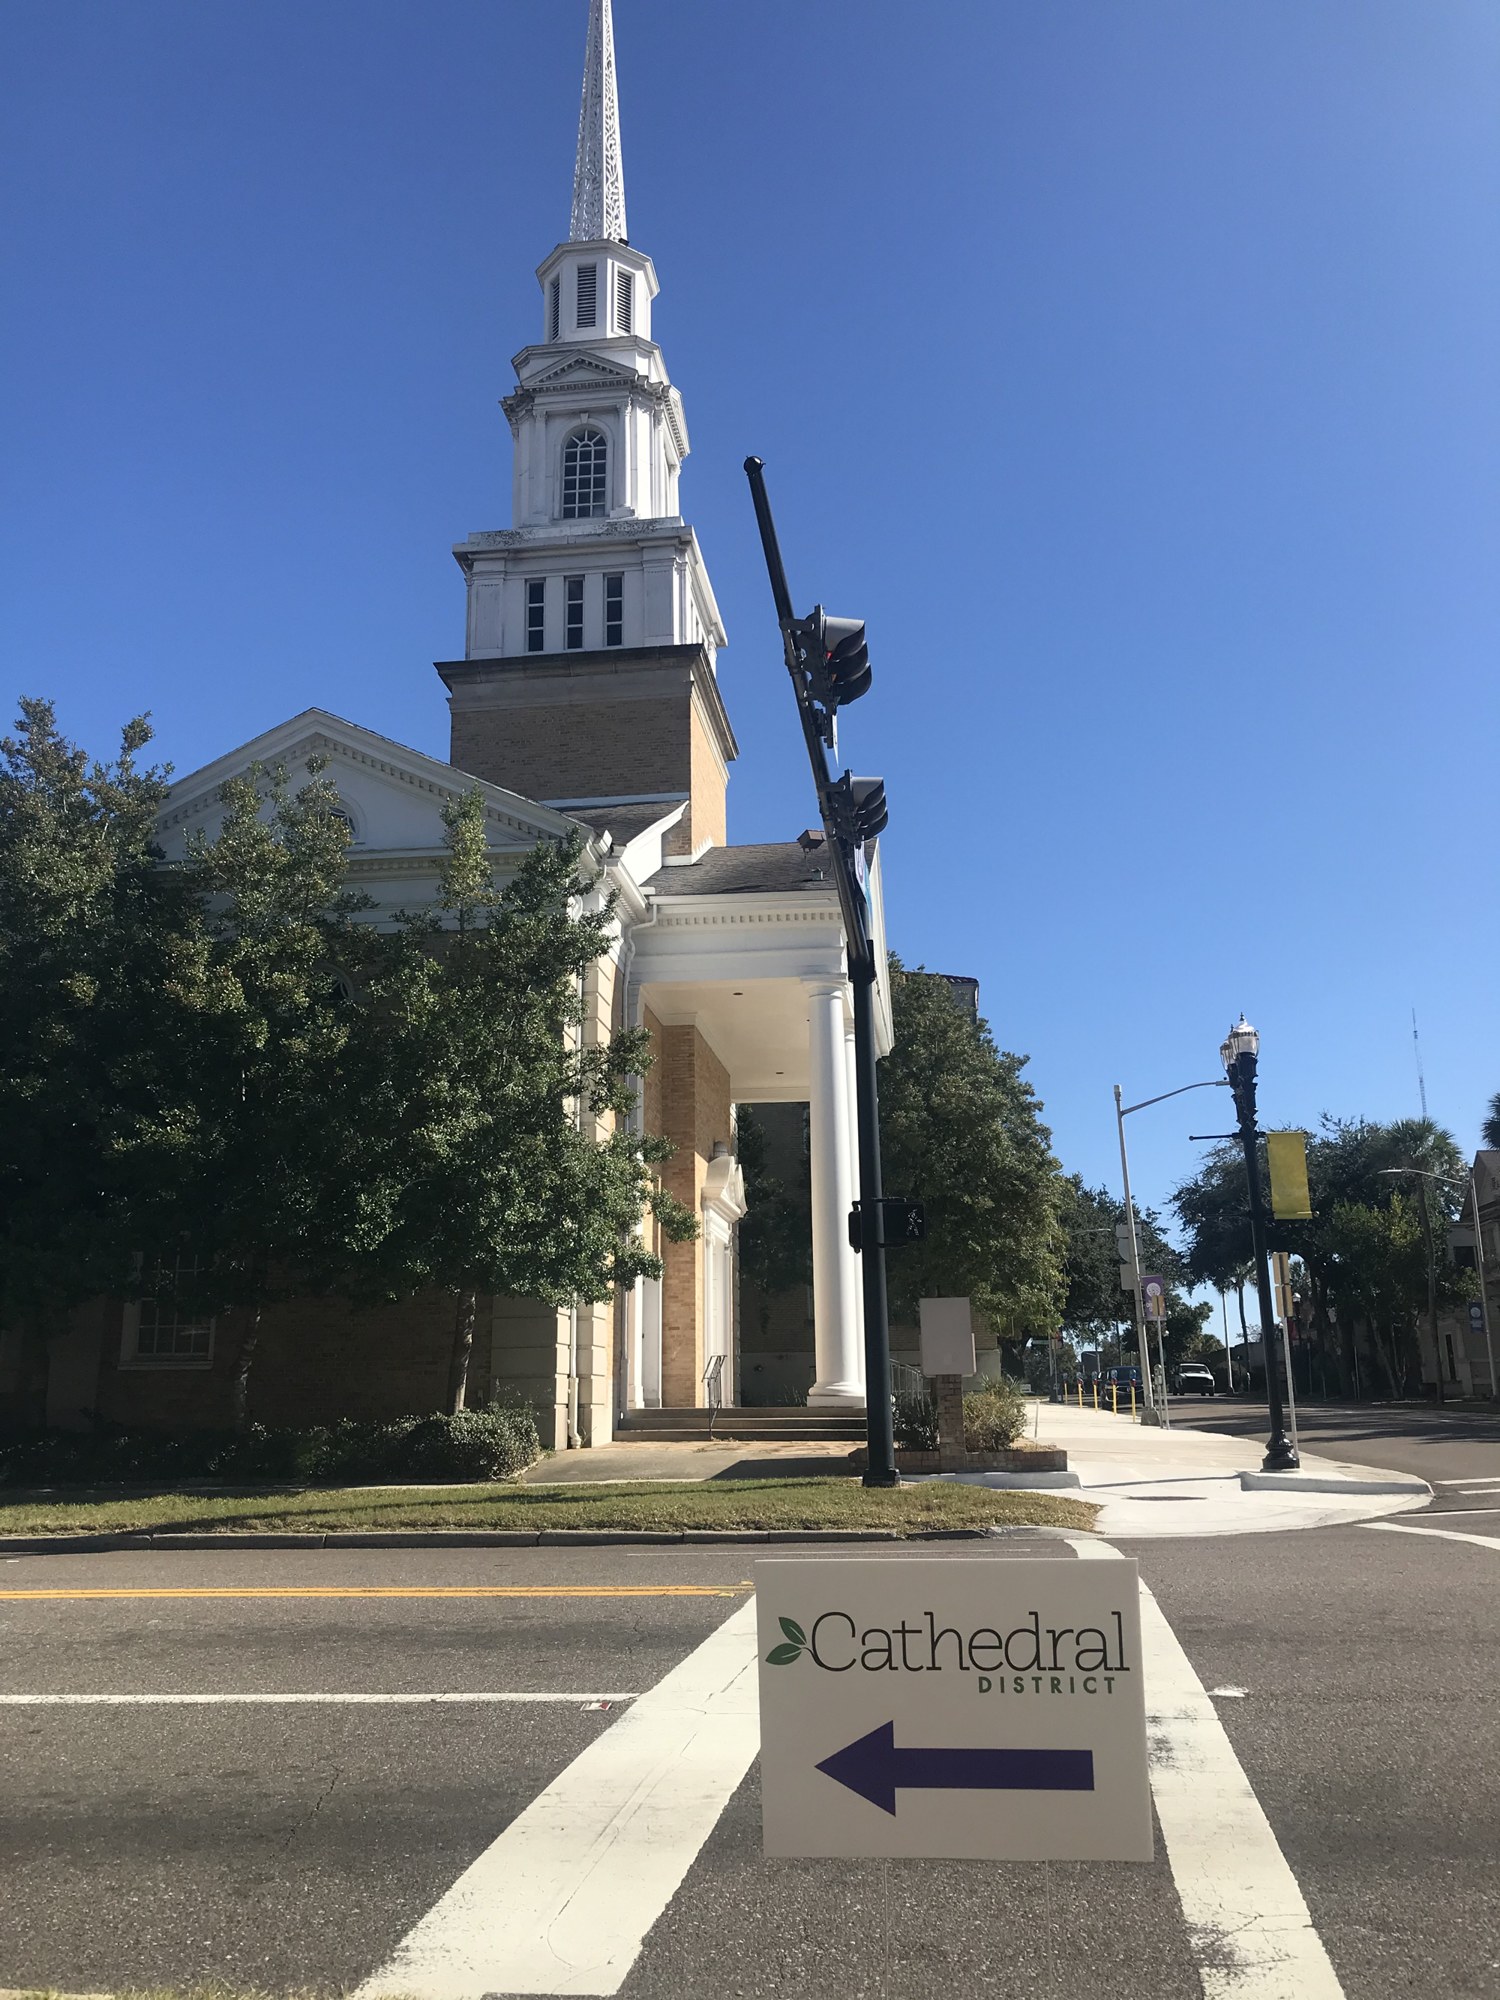 A sign points to the next destination in front of First United Methodist Church.